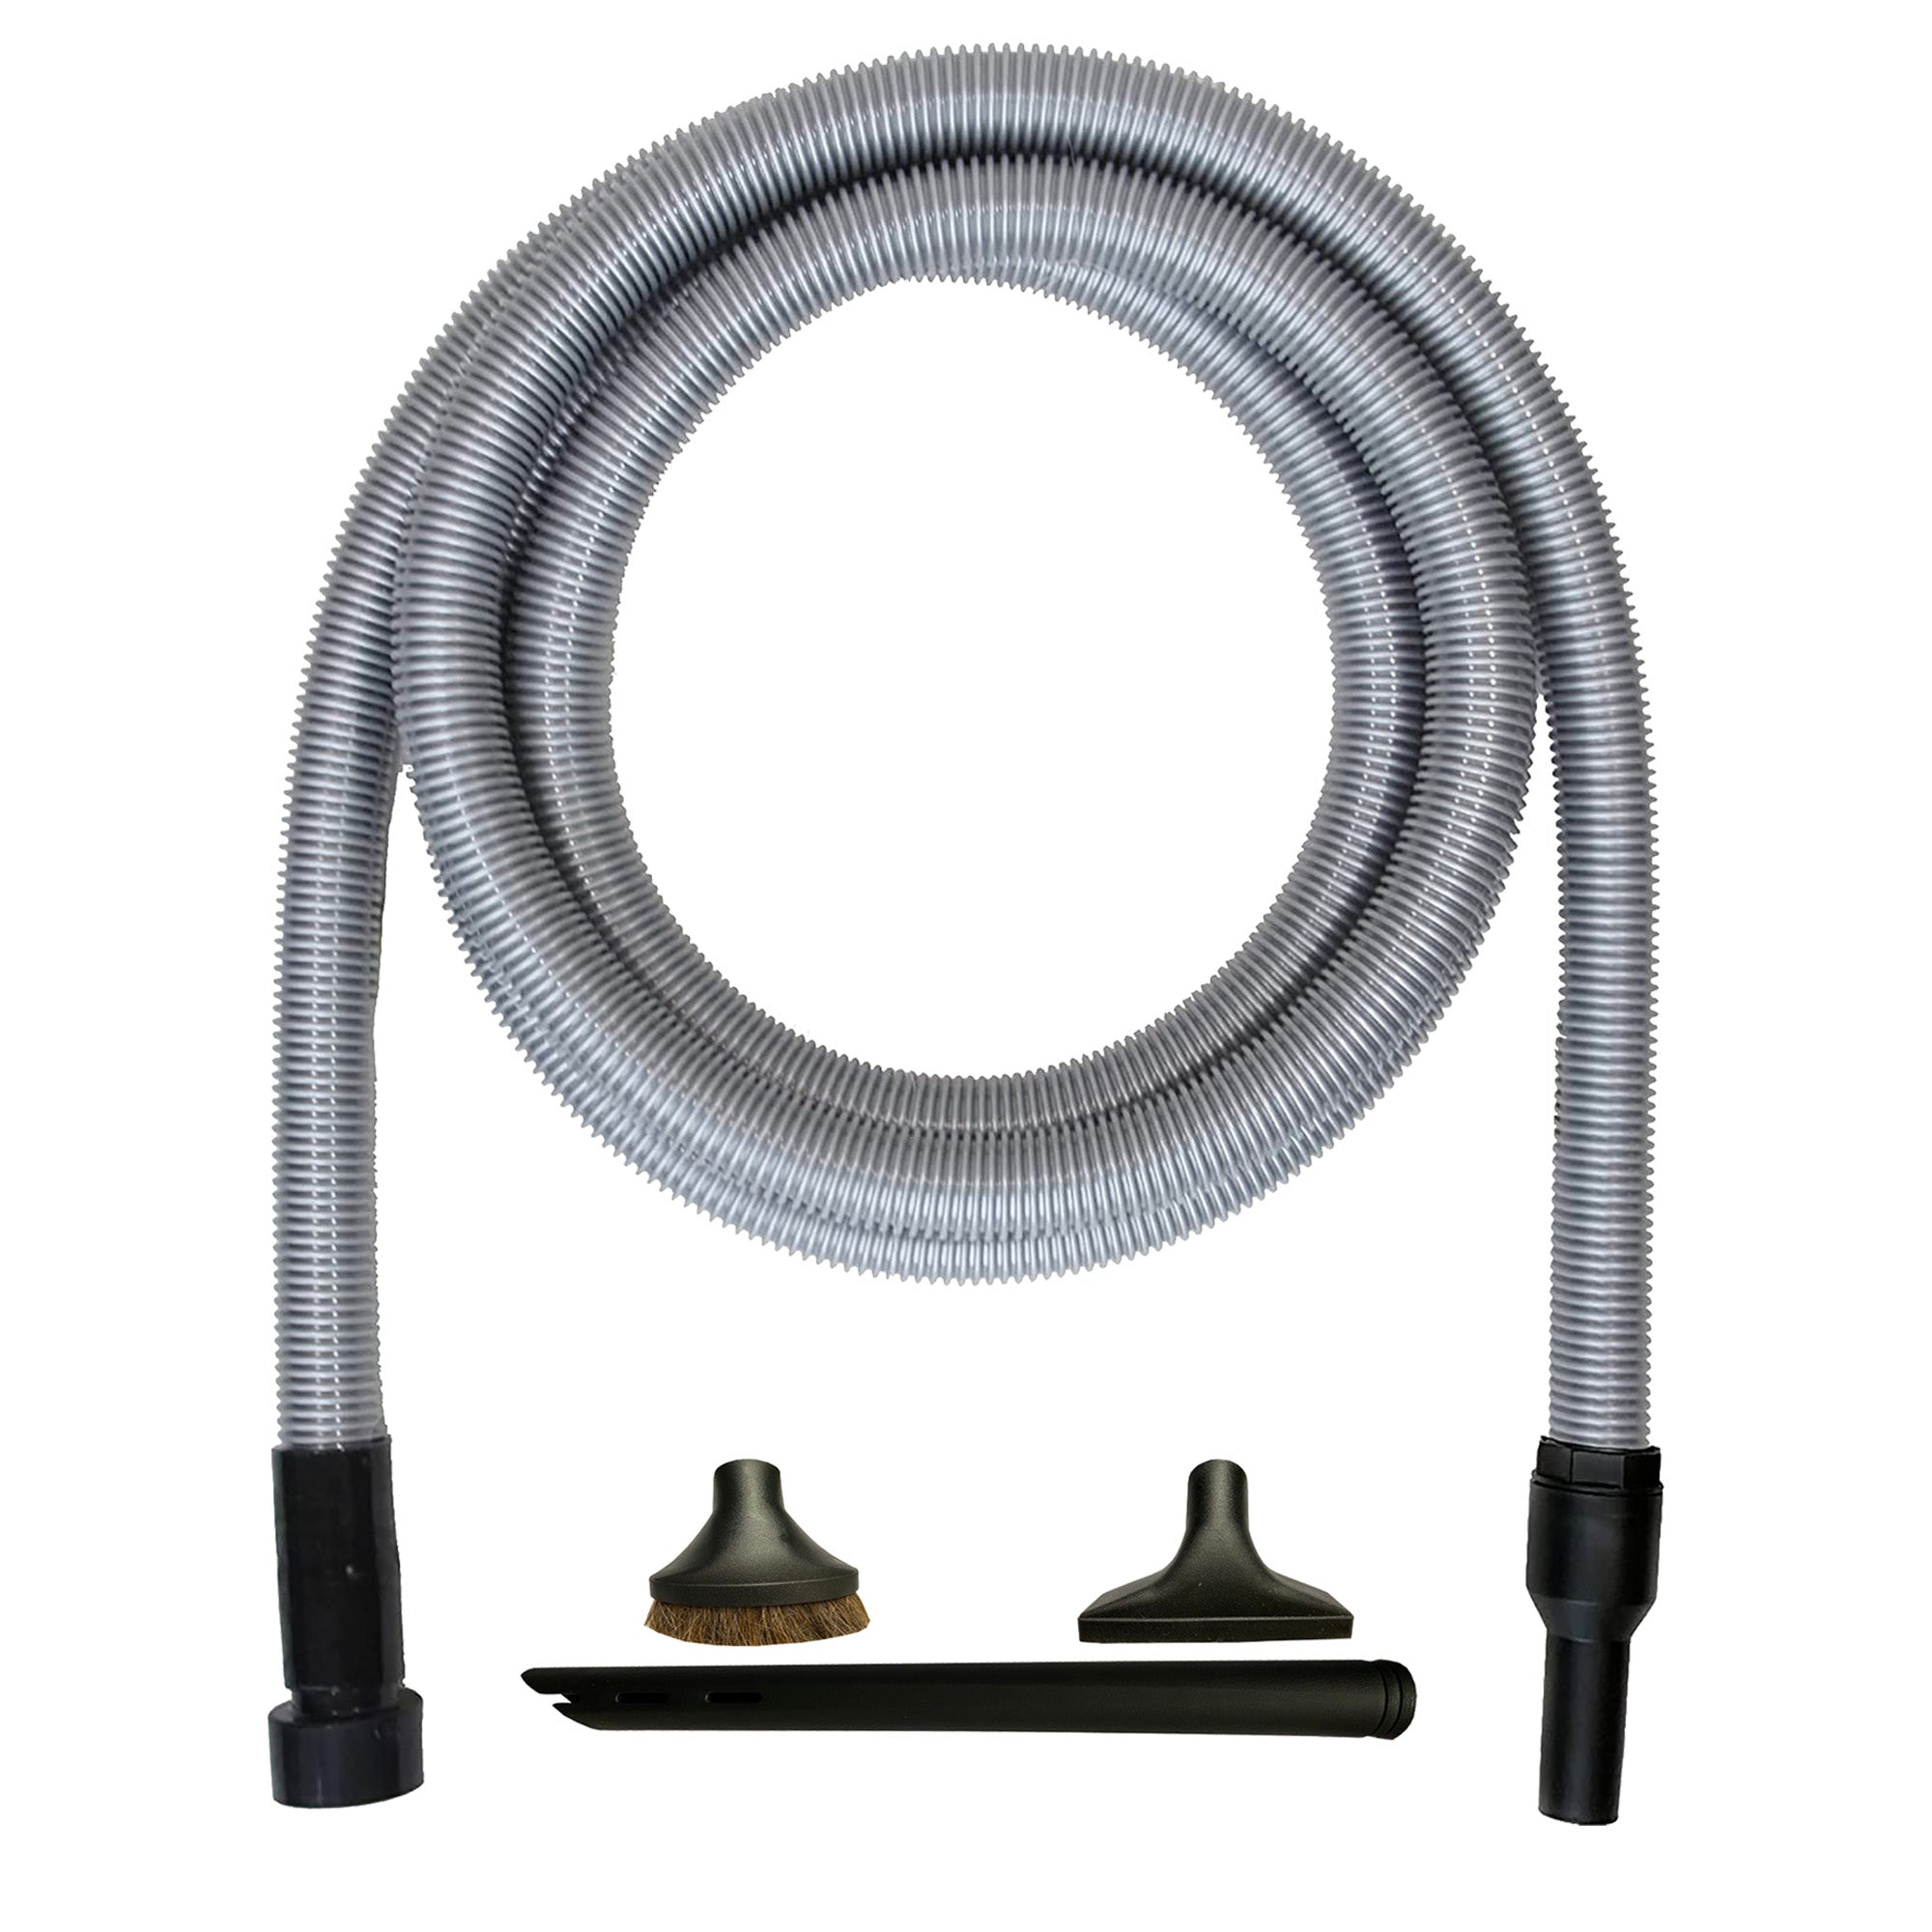 VPC Premium Wet Dry Shop Vacuum Extension Hose with 3 Piece Deluxe Cleaning Attachments - Silver